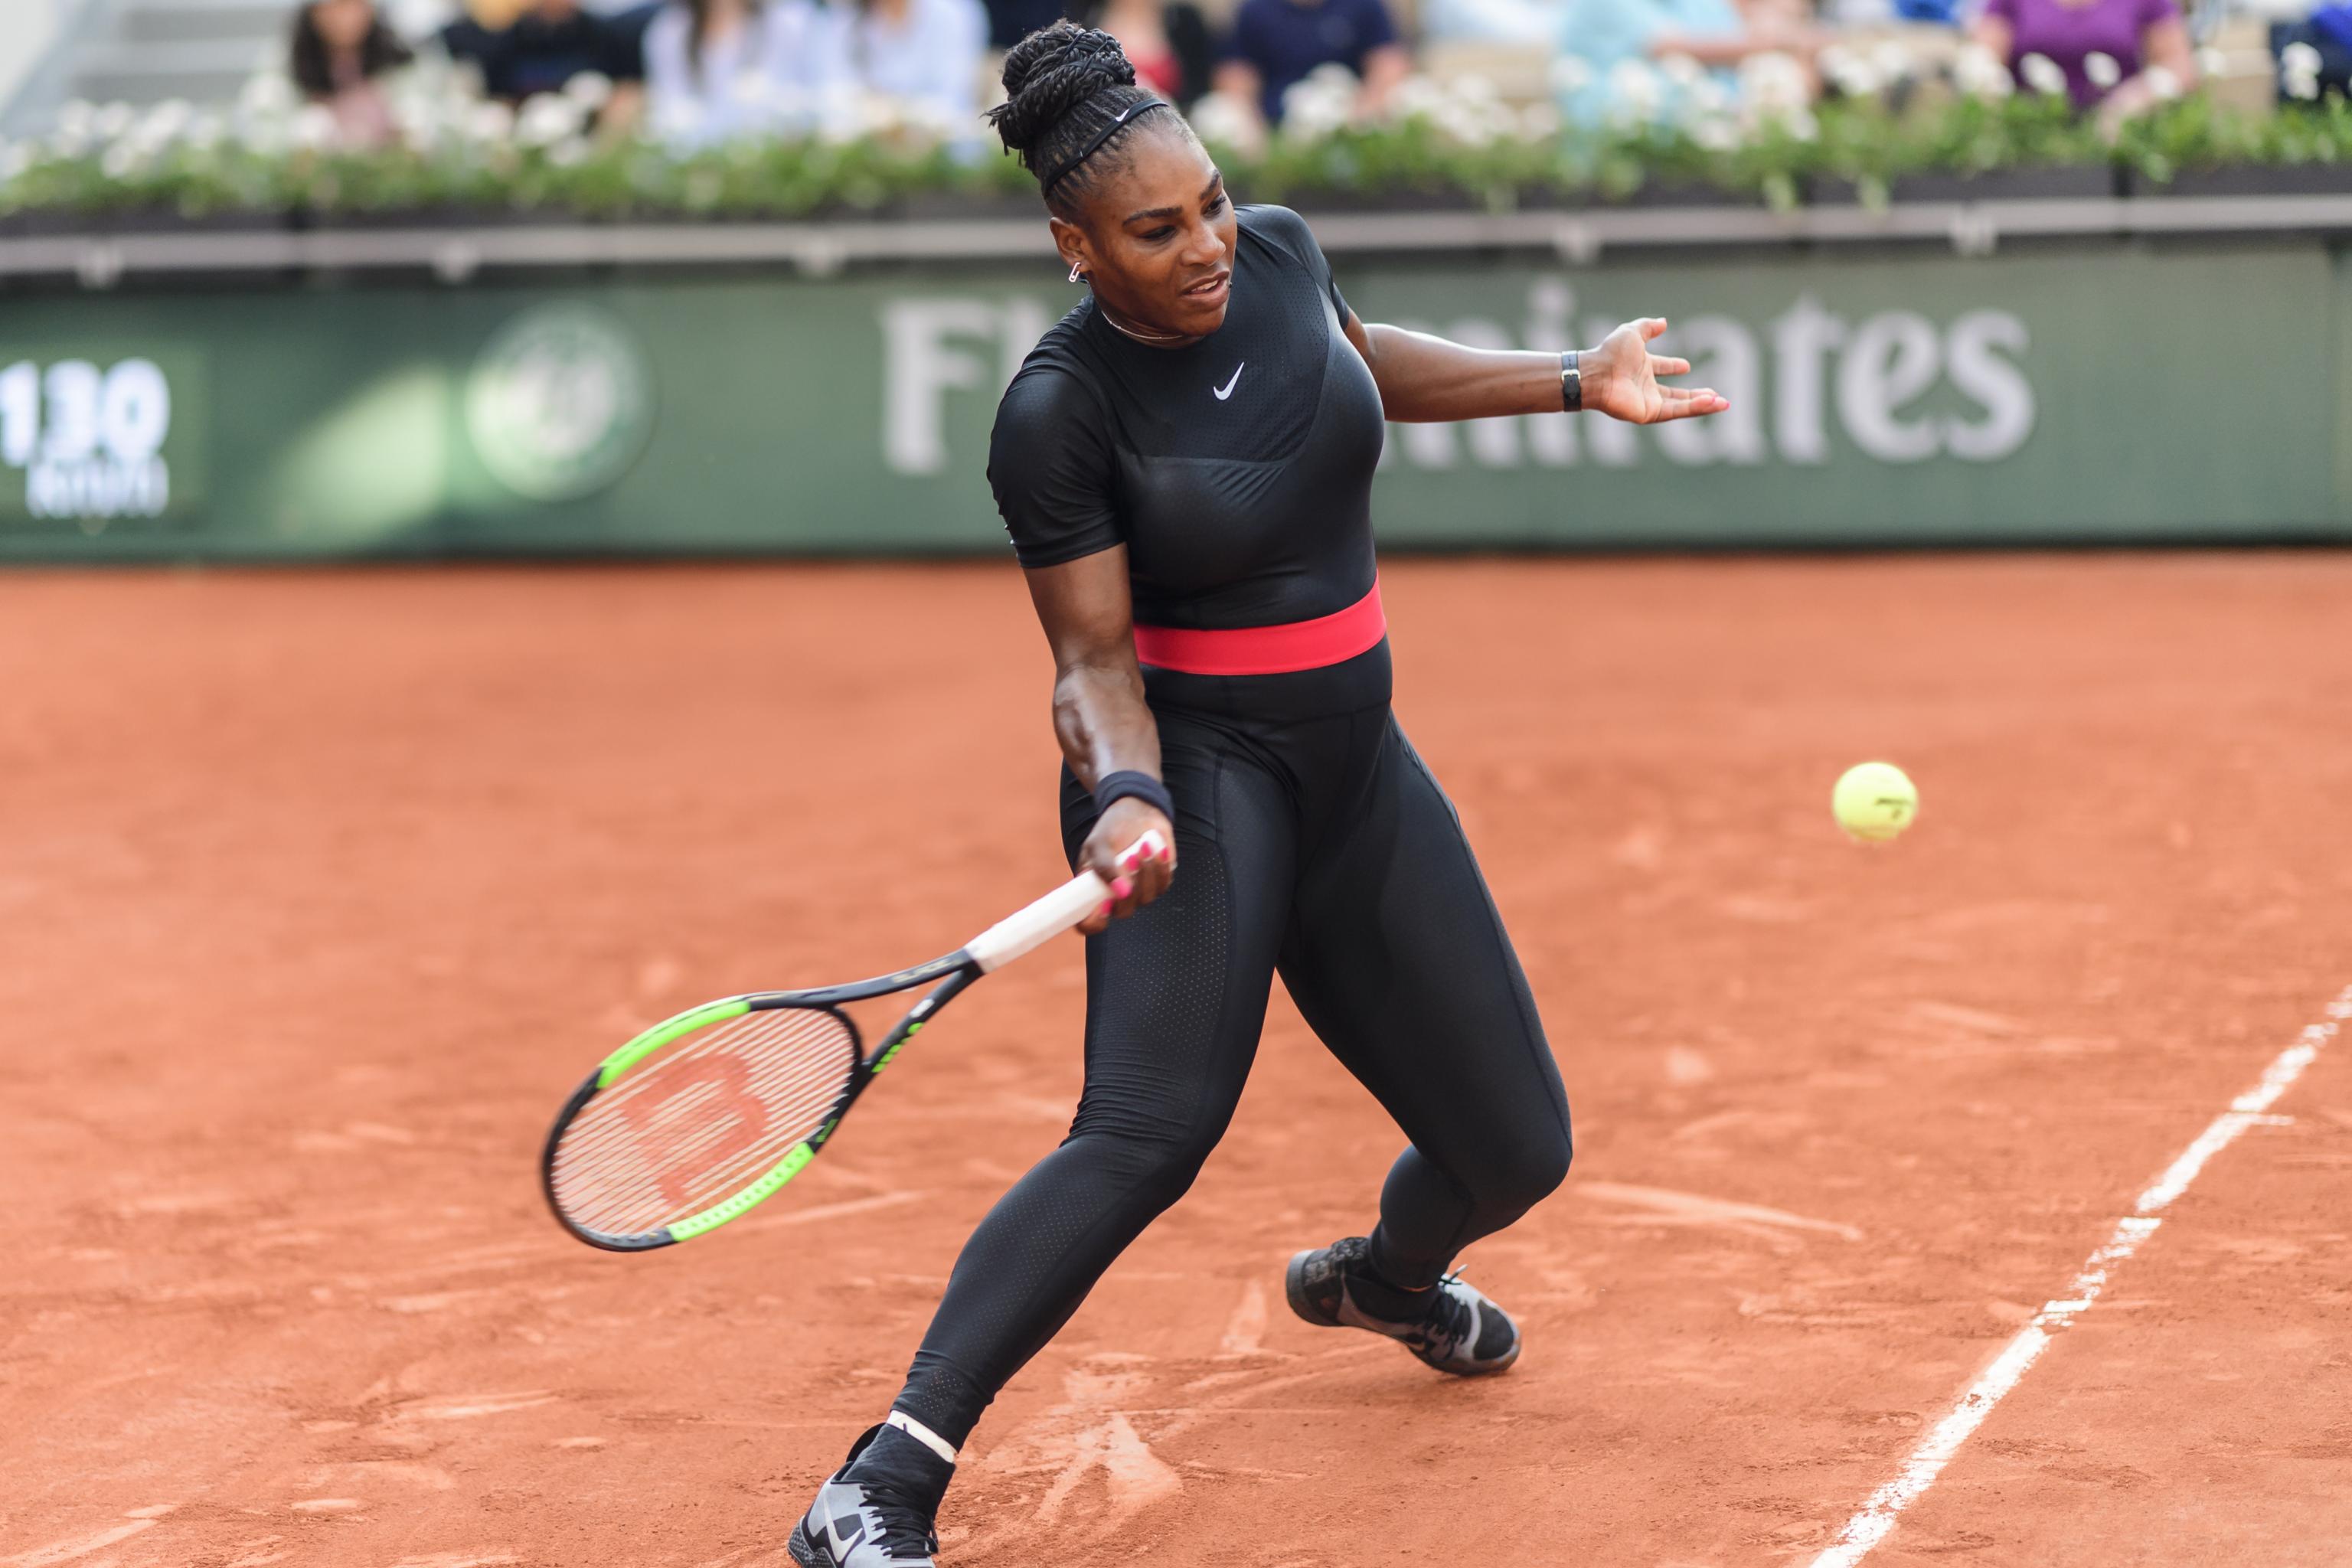 Nike on Serena Williams' Catsuit Ban: 'You Can Never Take Away Her Superpowers' News, Scores, Highlights, Stats, Rumors | Bleacher Report